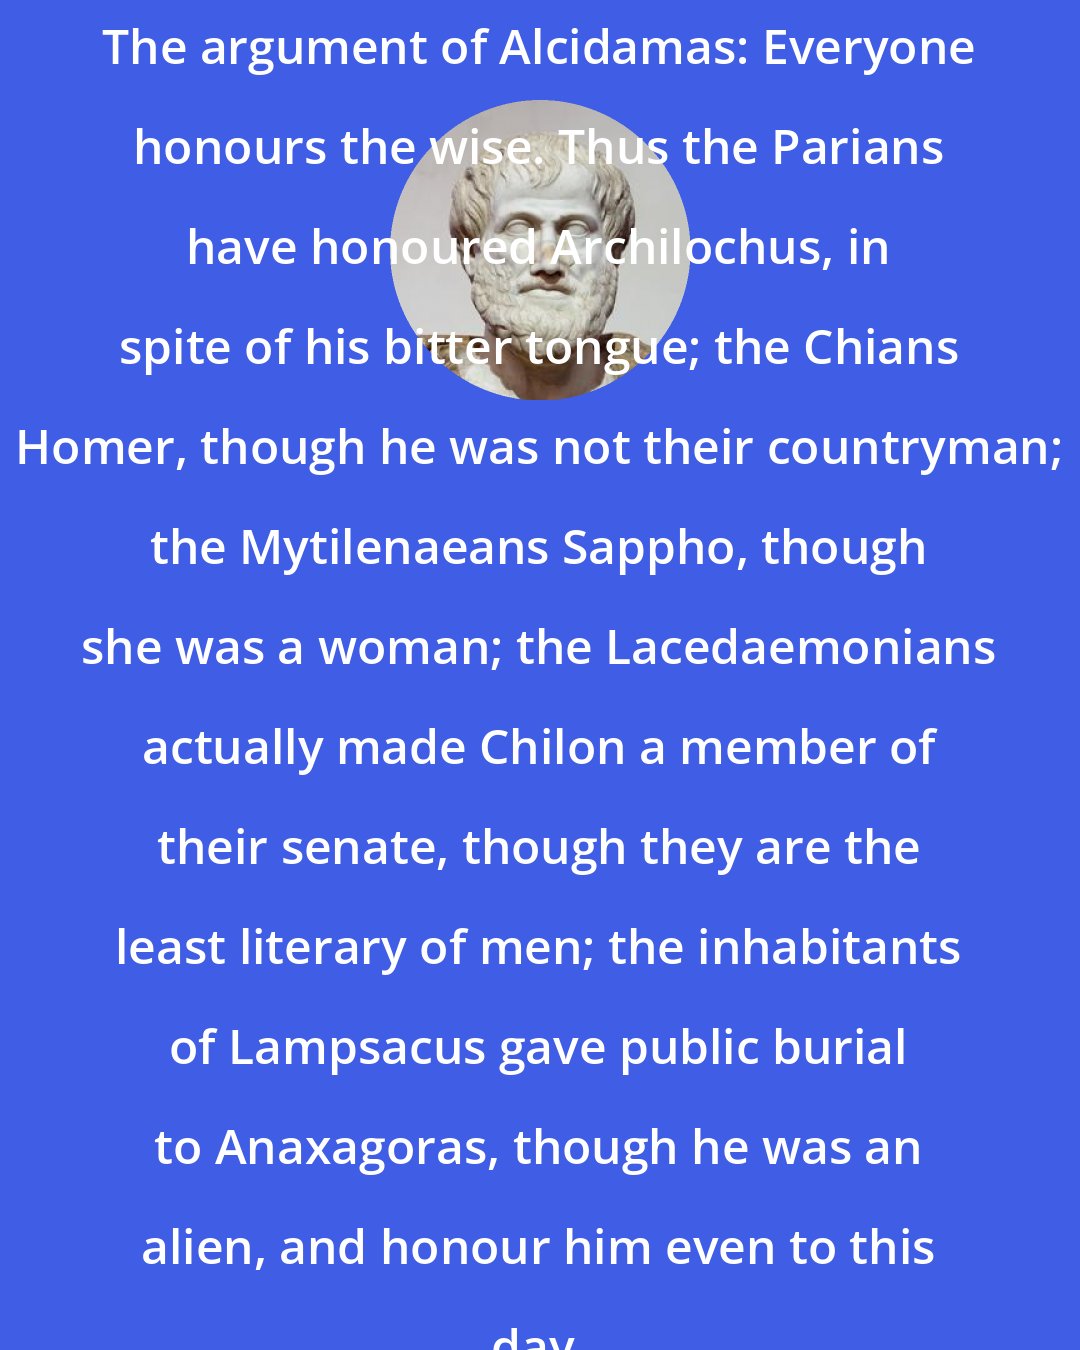 Aristotle: The argument of Alcidamas: Everyone honours the wise. Thus the Parians have honoured Archilochus, in spite of his bitter tongue; the Chians Homer, though he was not their countryman; the Mytilenaeans Sappho, though she was a woman; the Lacedaemonians actually made Chilon a member of their senate, though they are the least literary of men; the inhabitants of Lampsacus gave public burial to Anaxagoras, though he was an alien, and honour him even to this day.